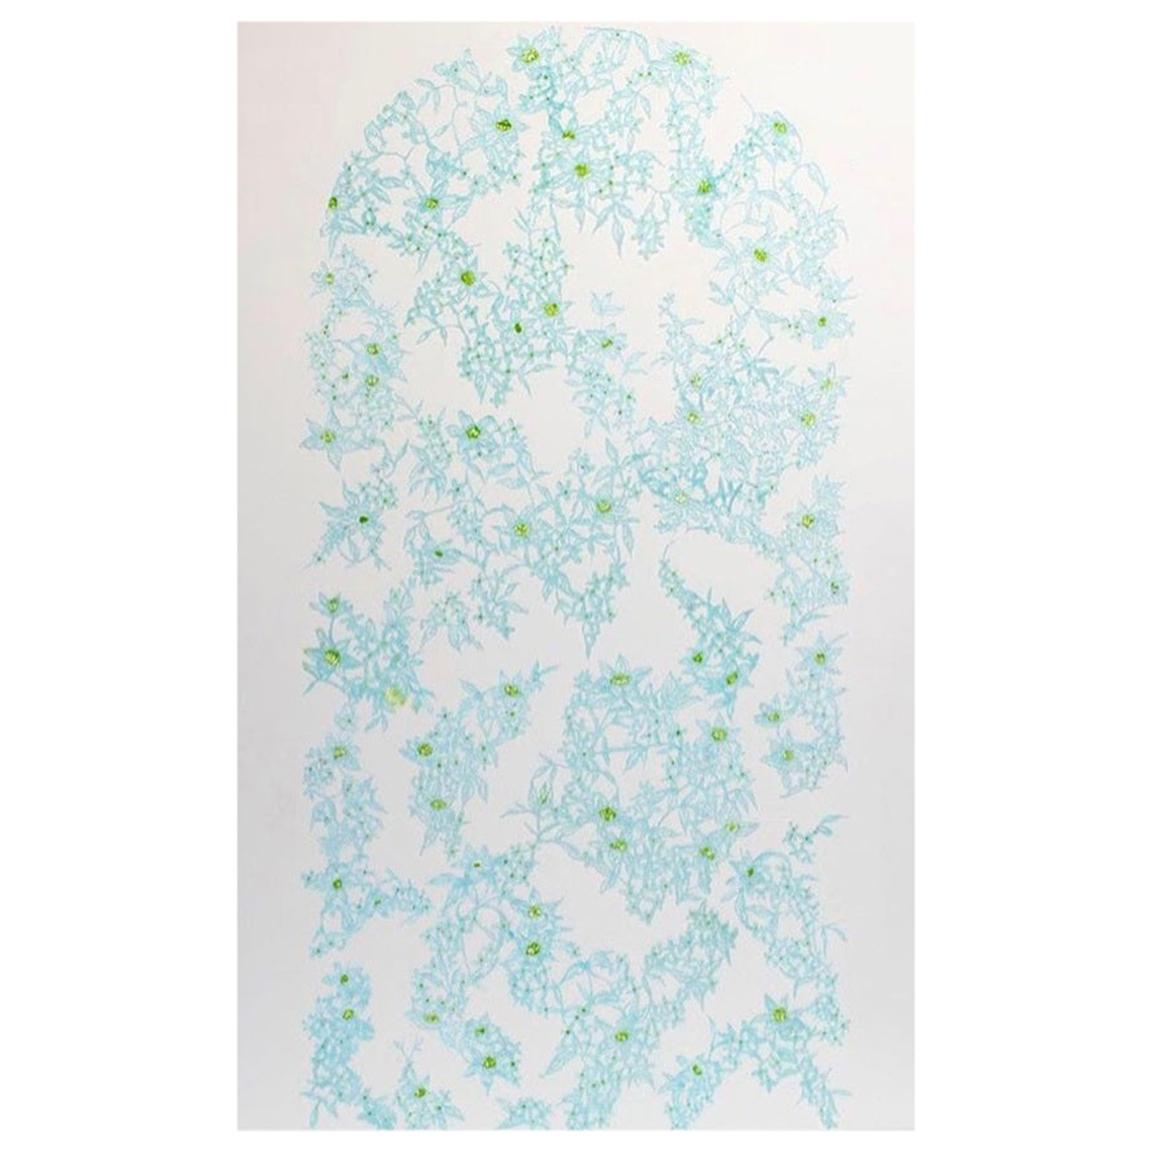 KATE CLEMENTS - Wall Installation - Blue Hydrangeas For Sale